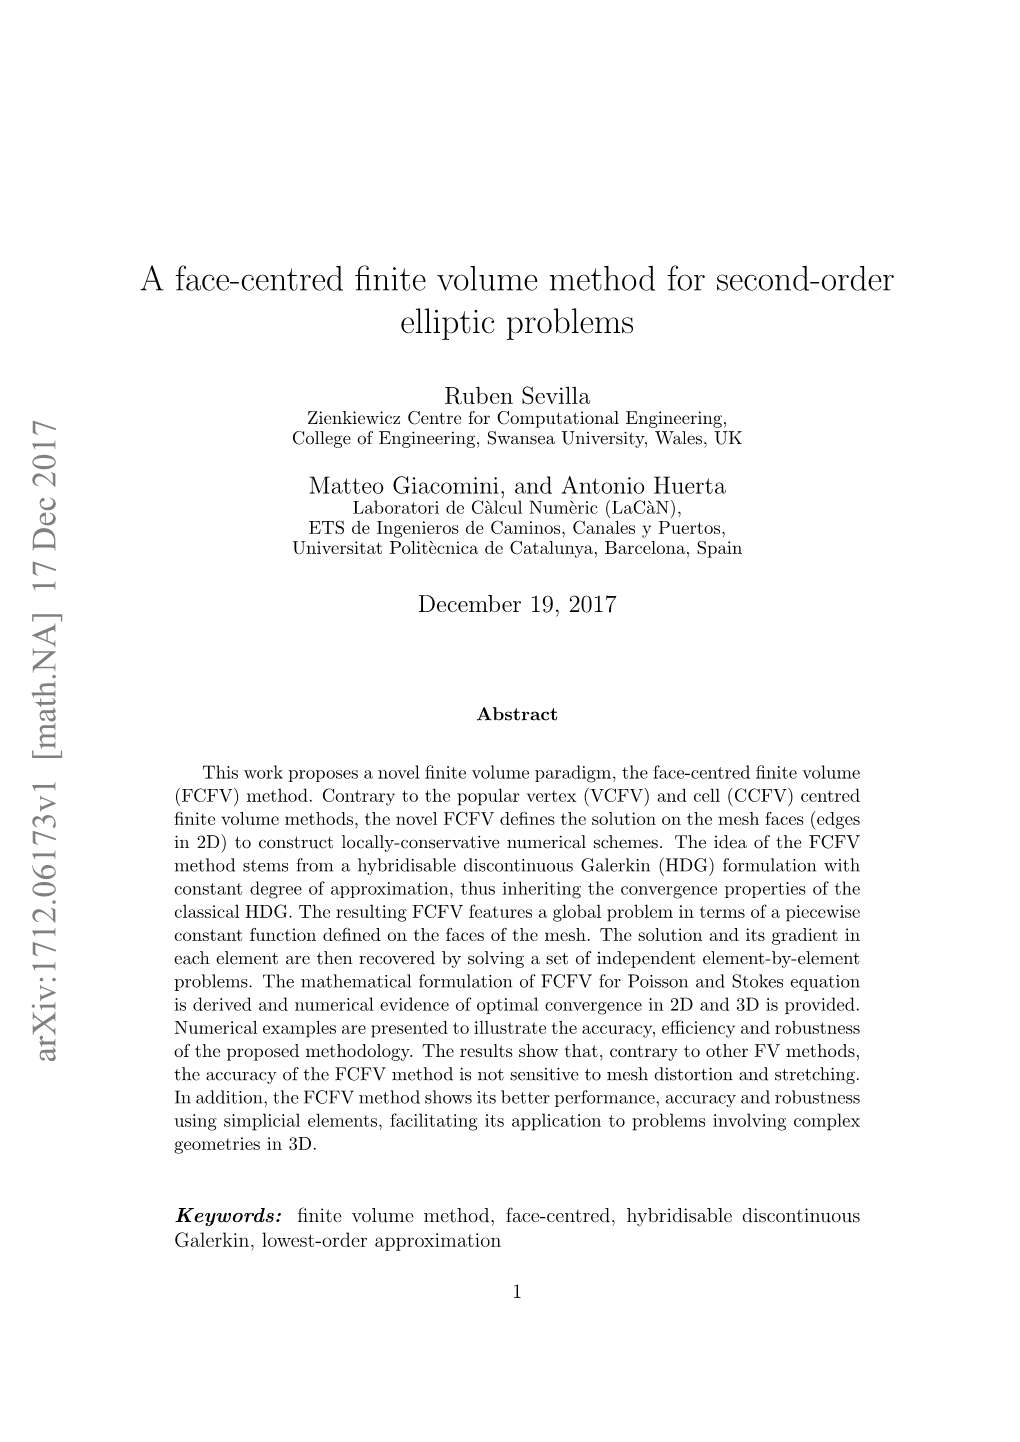 A Face-Centred Finite Volume Method for Second-Order Elliptic Problems